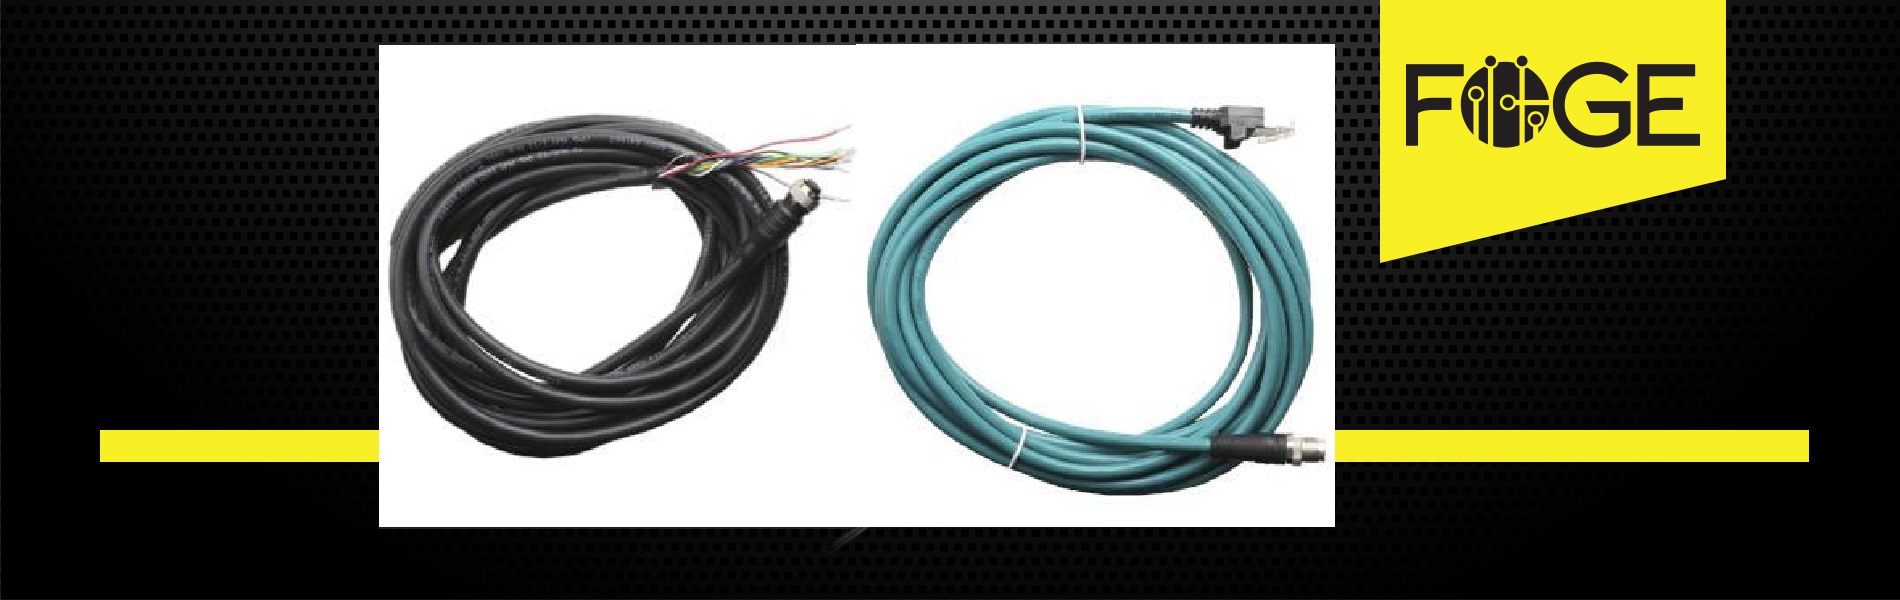 CABLE AND ACCESSORIES